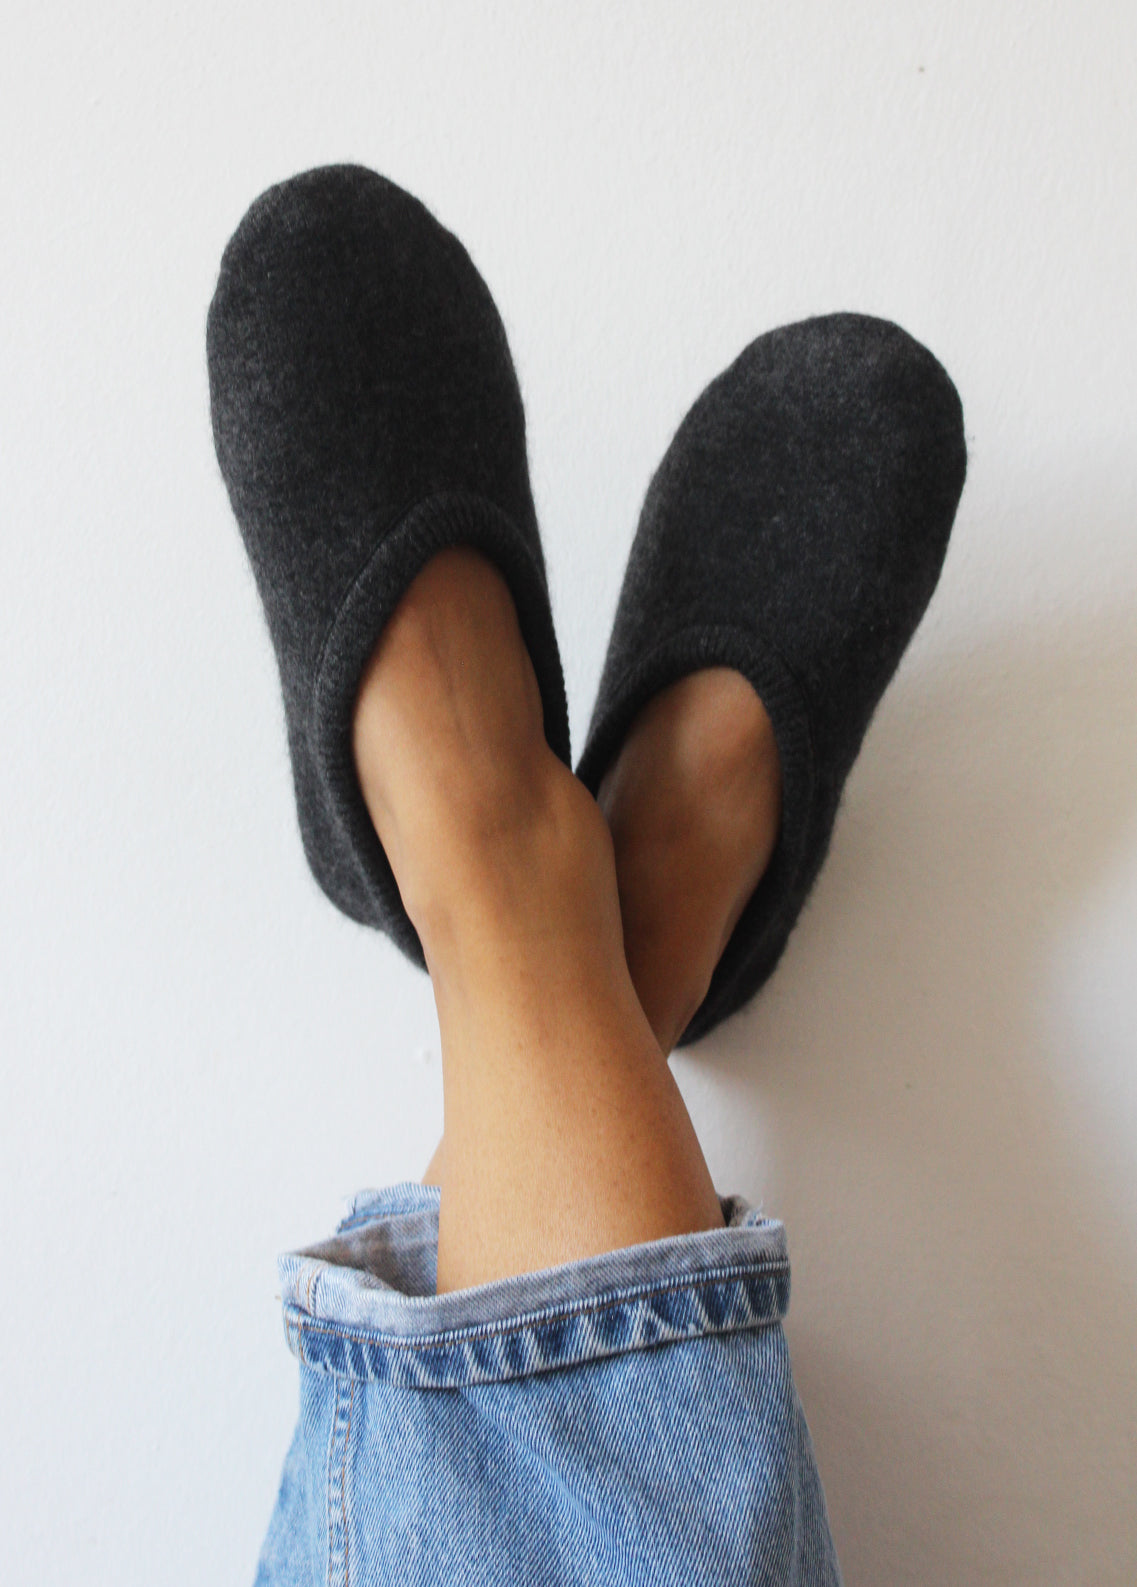 Reclaimed cashmere slippers